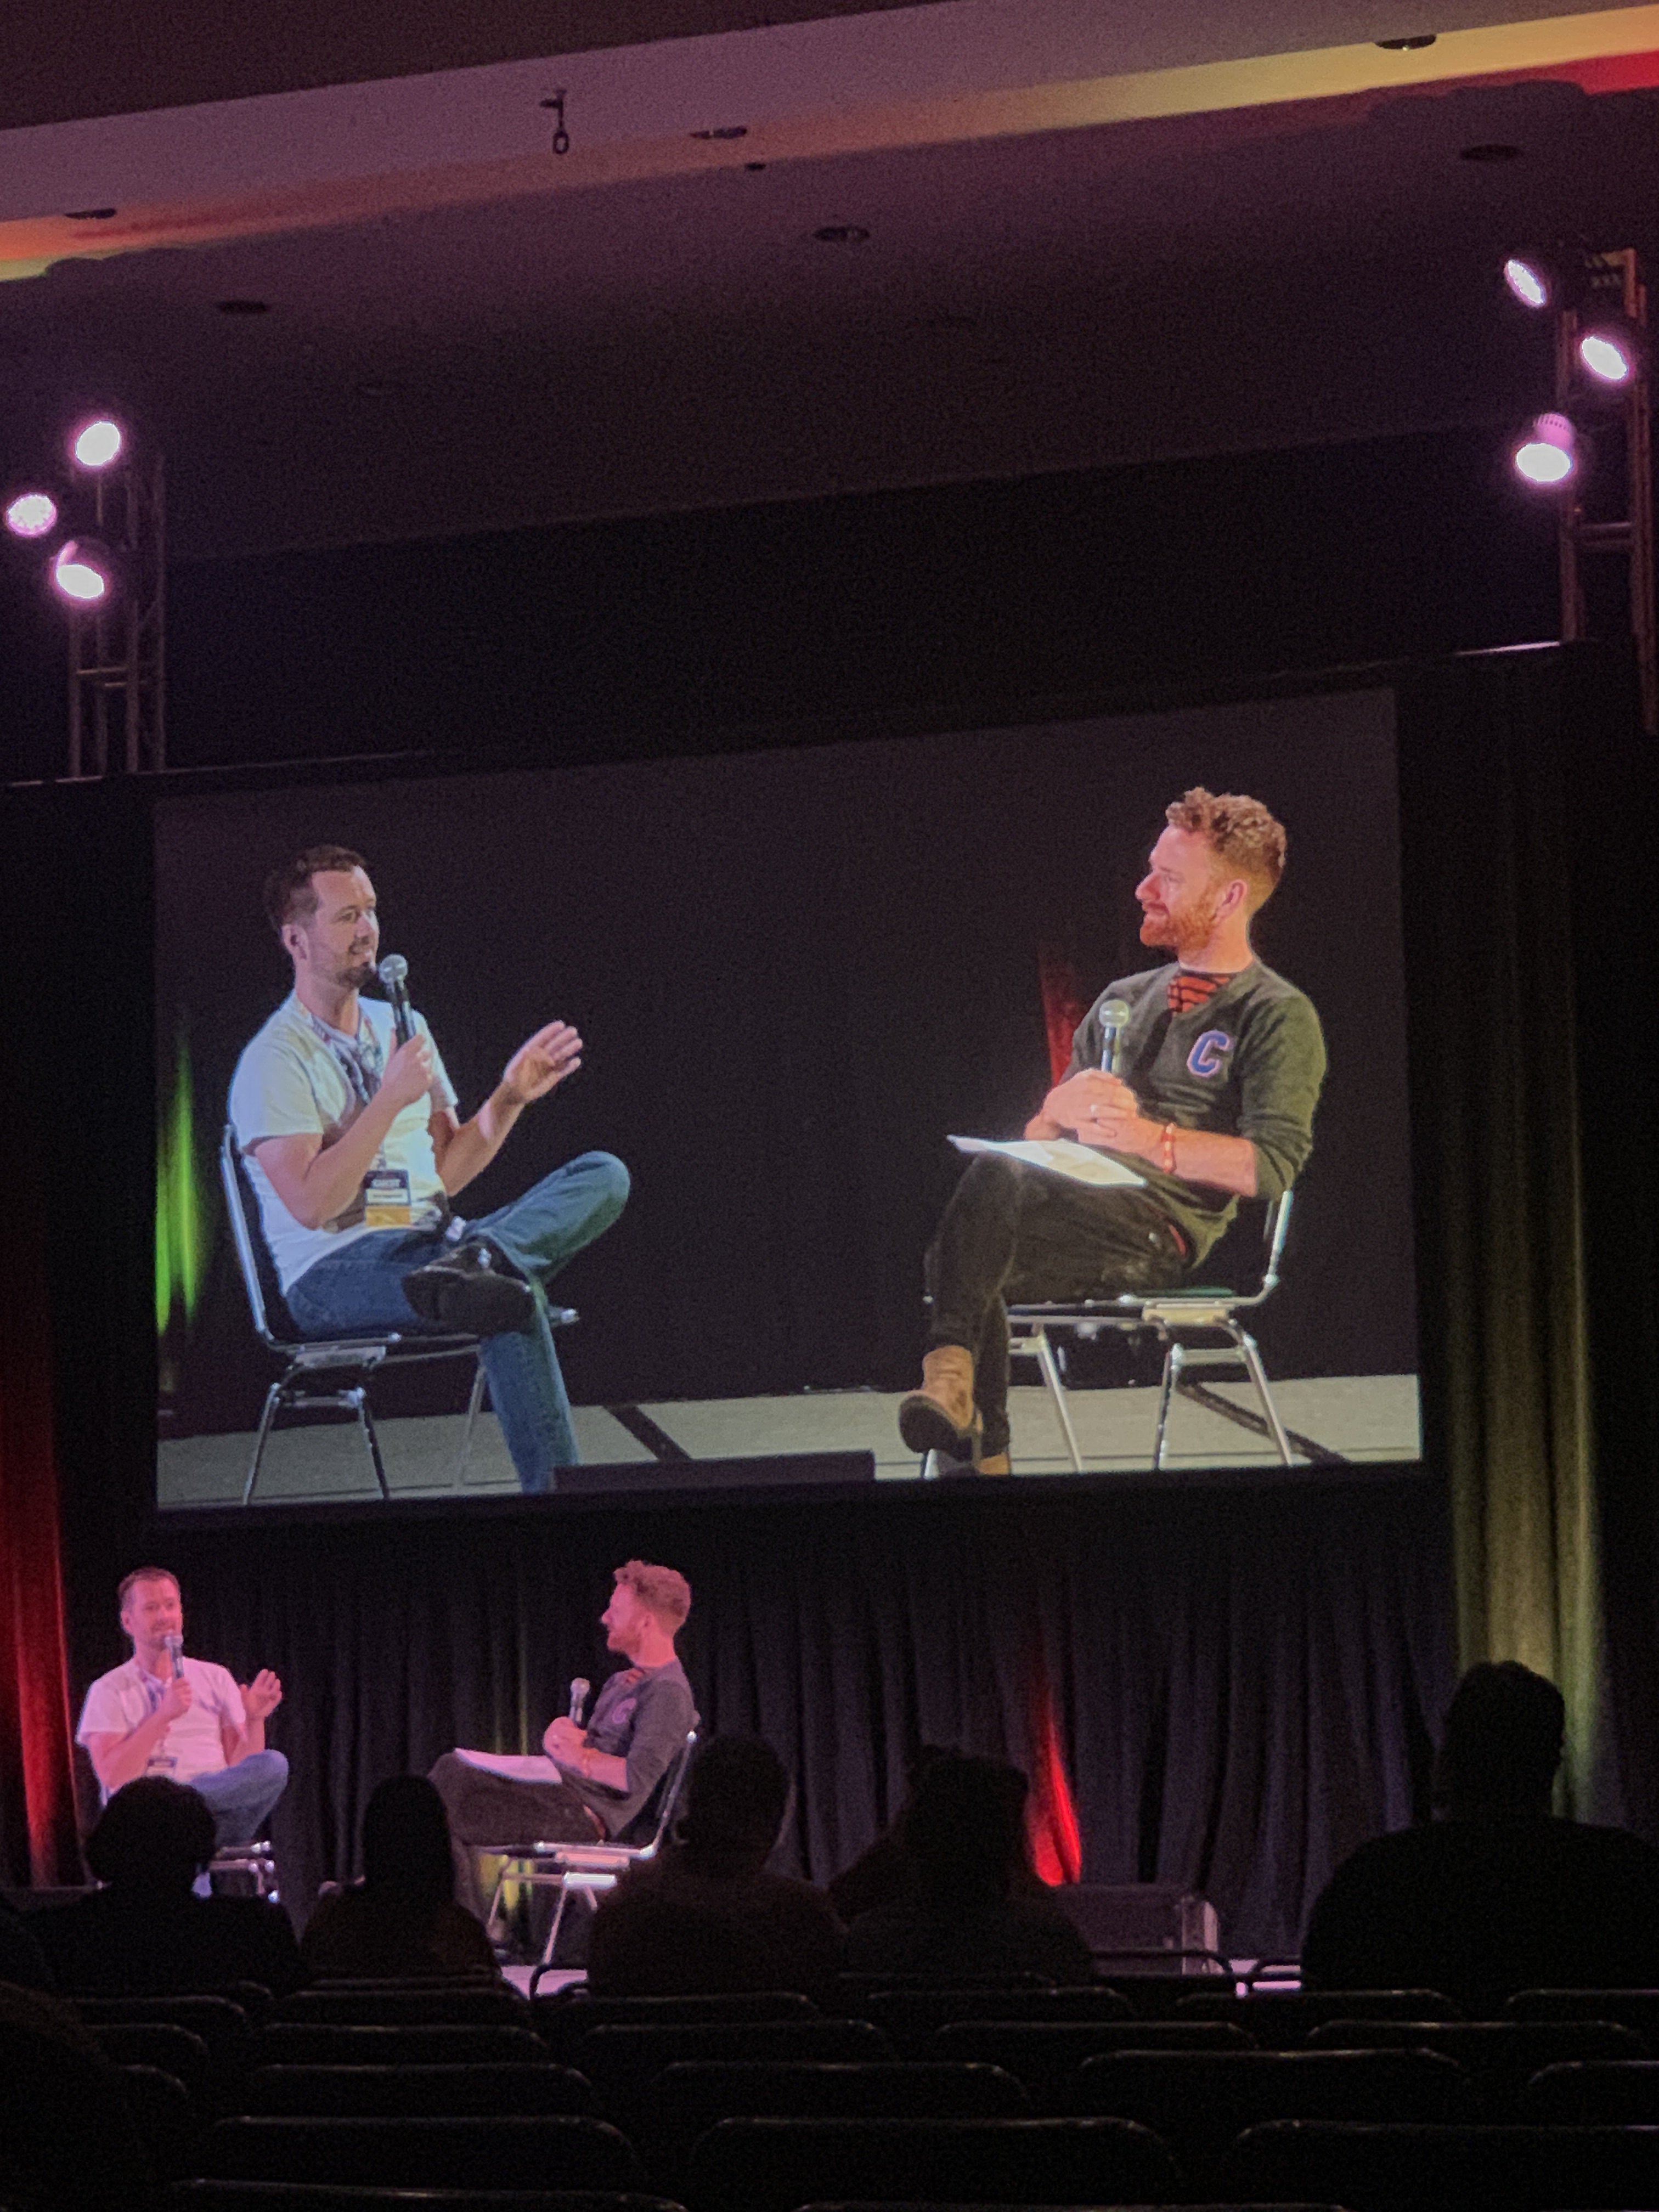 Sean Biggerstaff and Chris Rankin chatting with eachother on a stage with a video of them behind to enlarge for the rest of the room. Several people are in seats in silhouette in front of them.